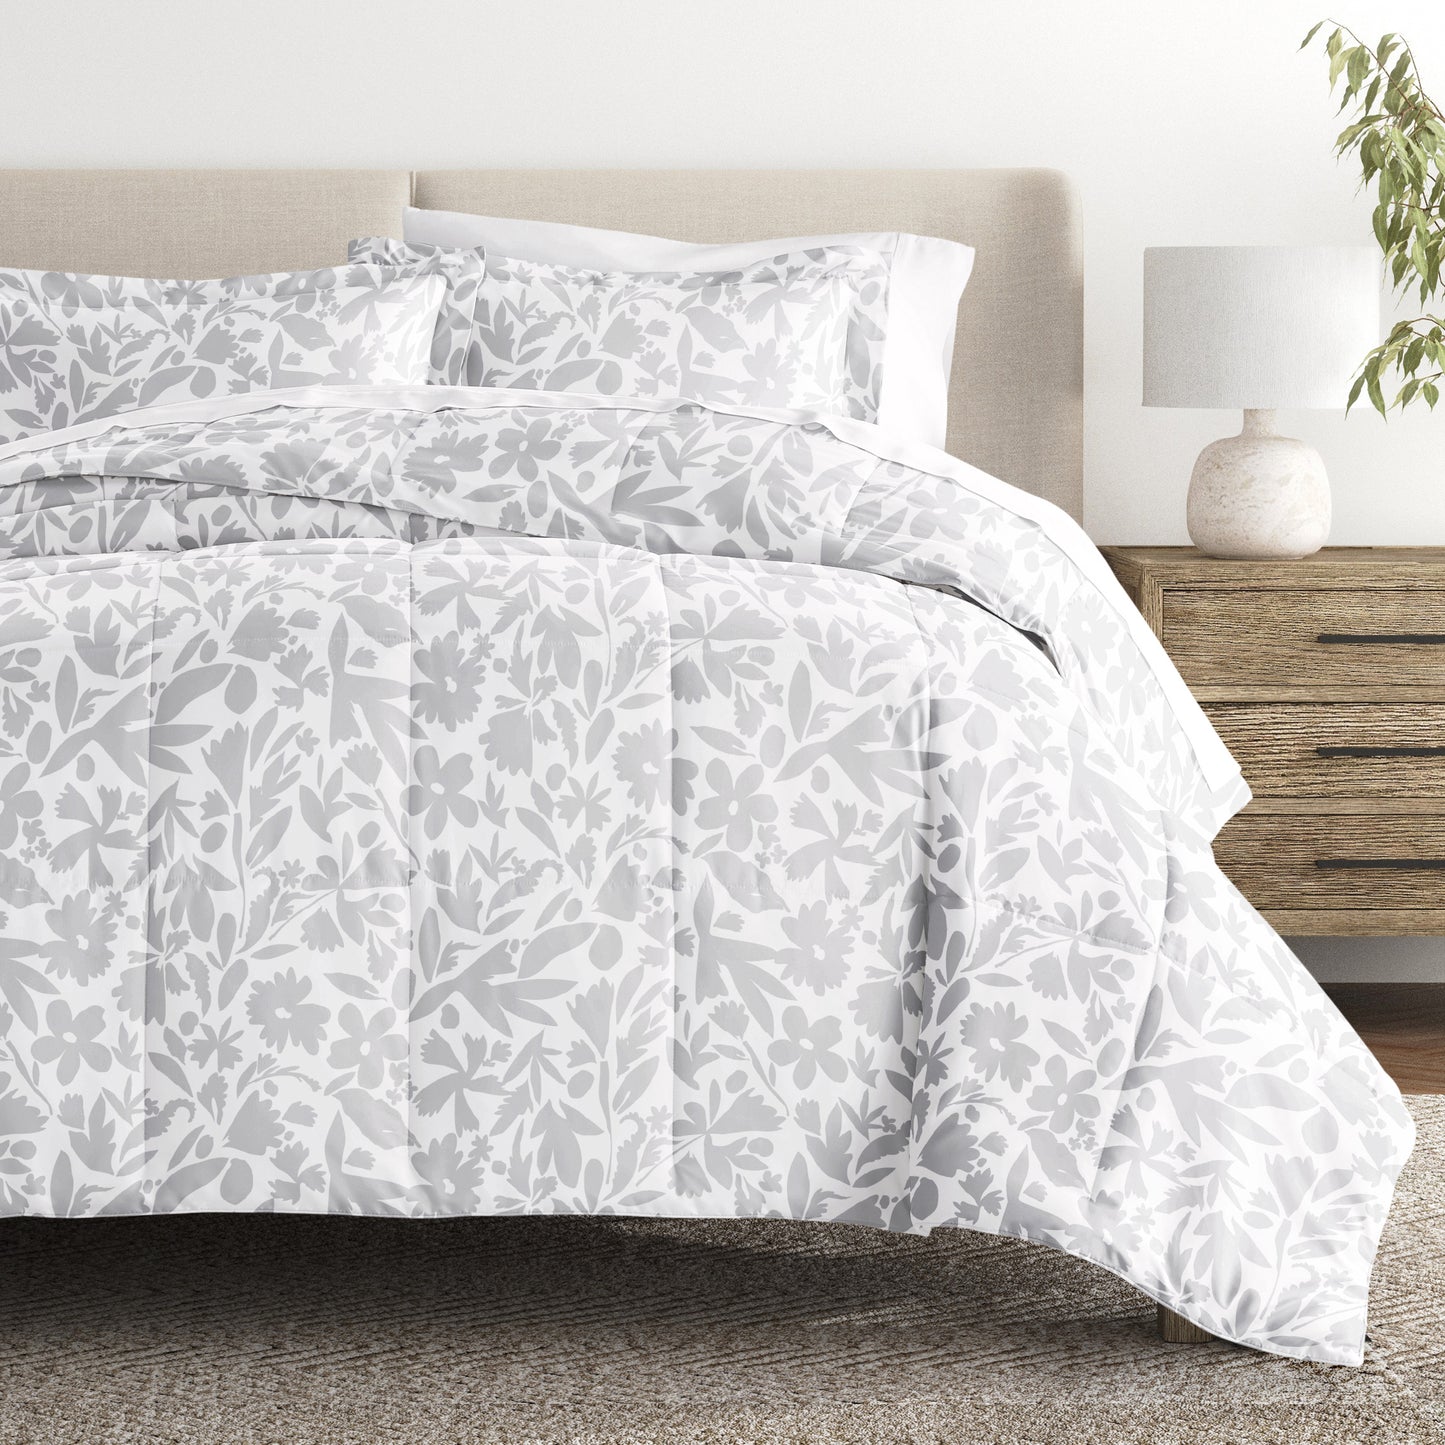 Comforter Sets in Beautiful Patterns